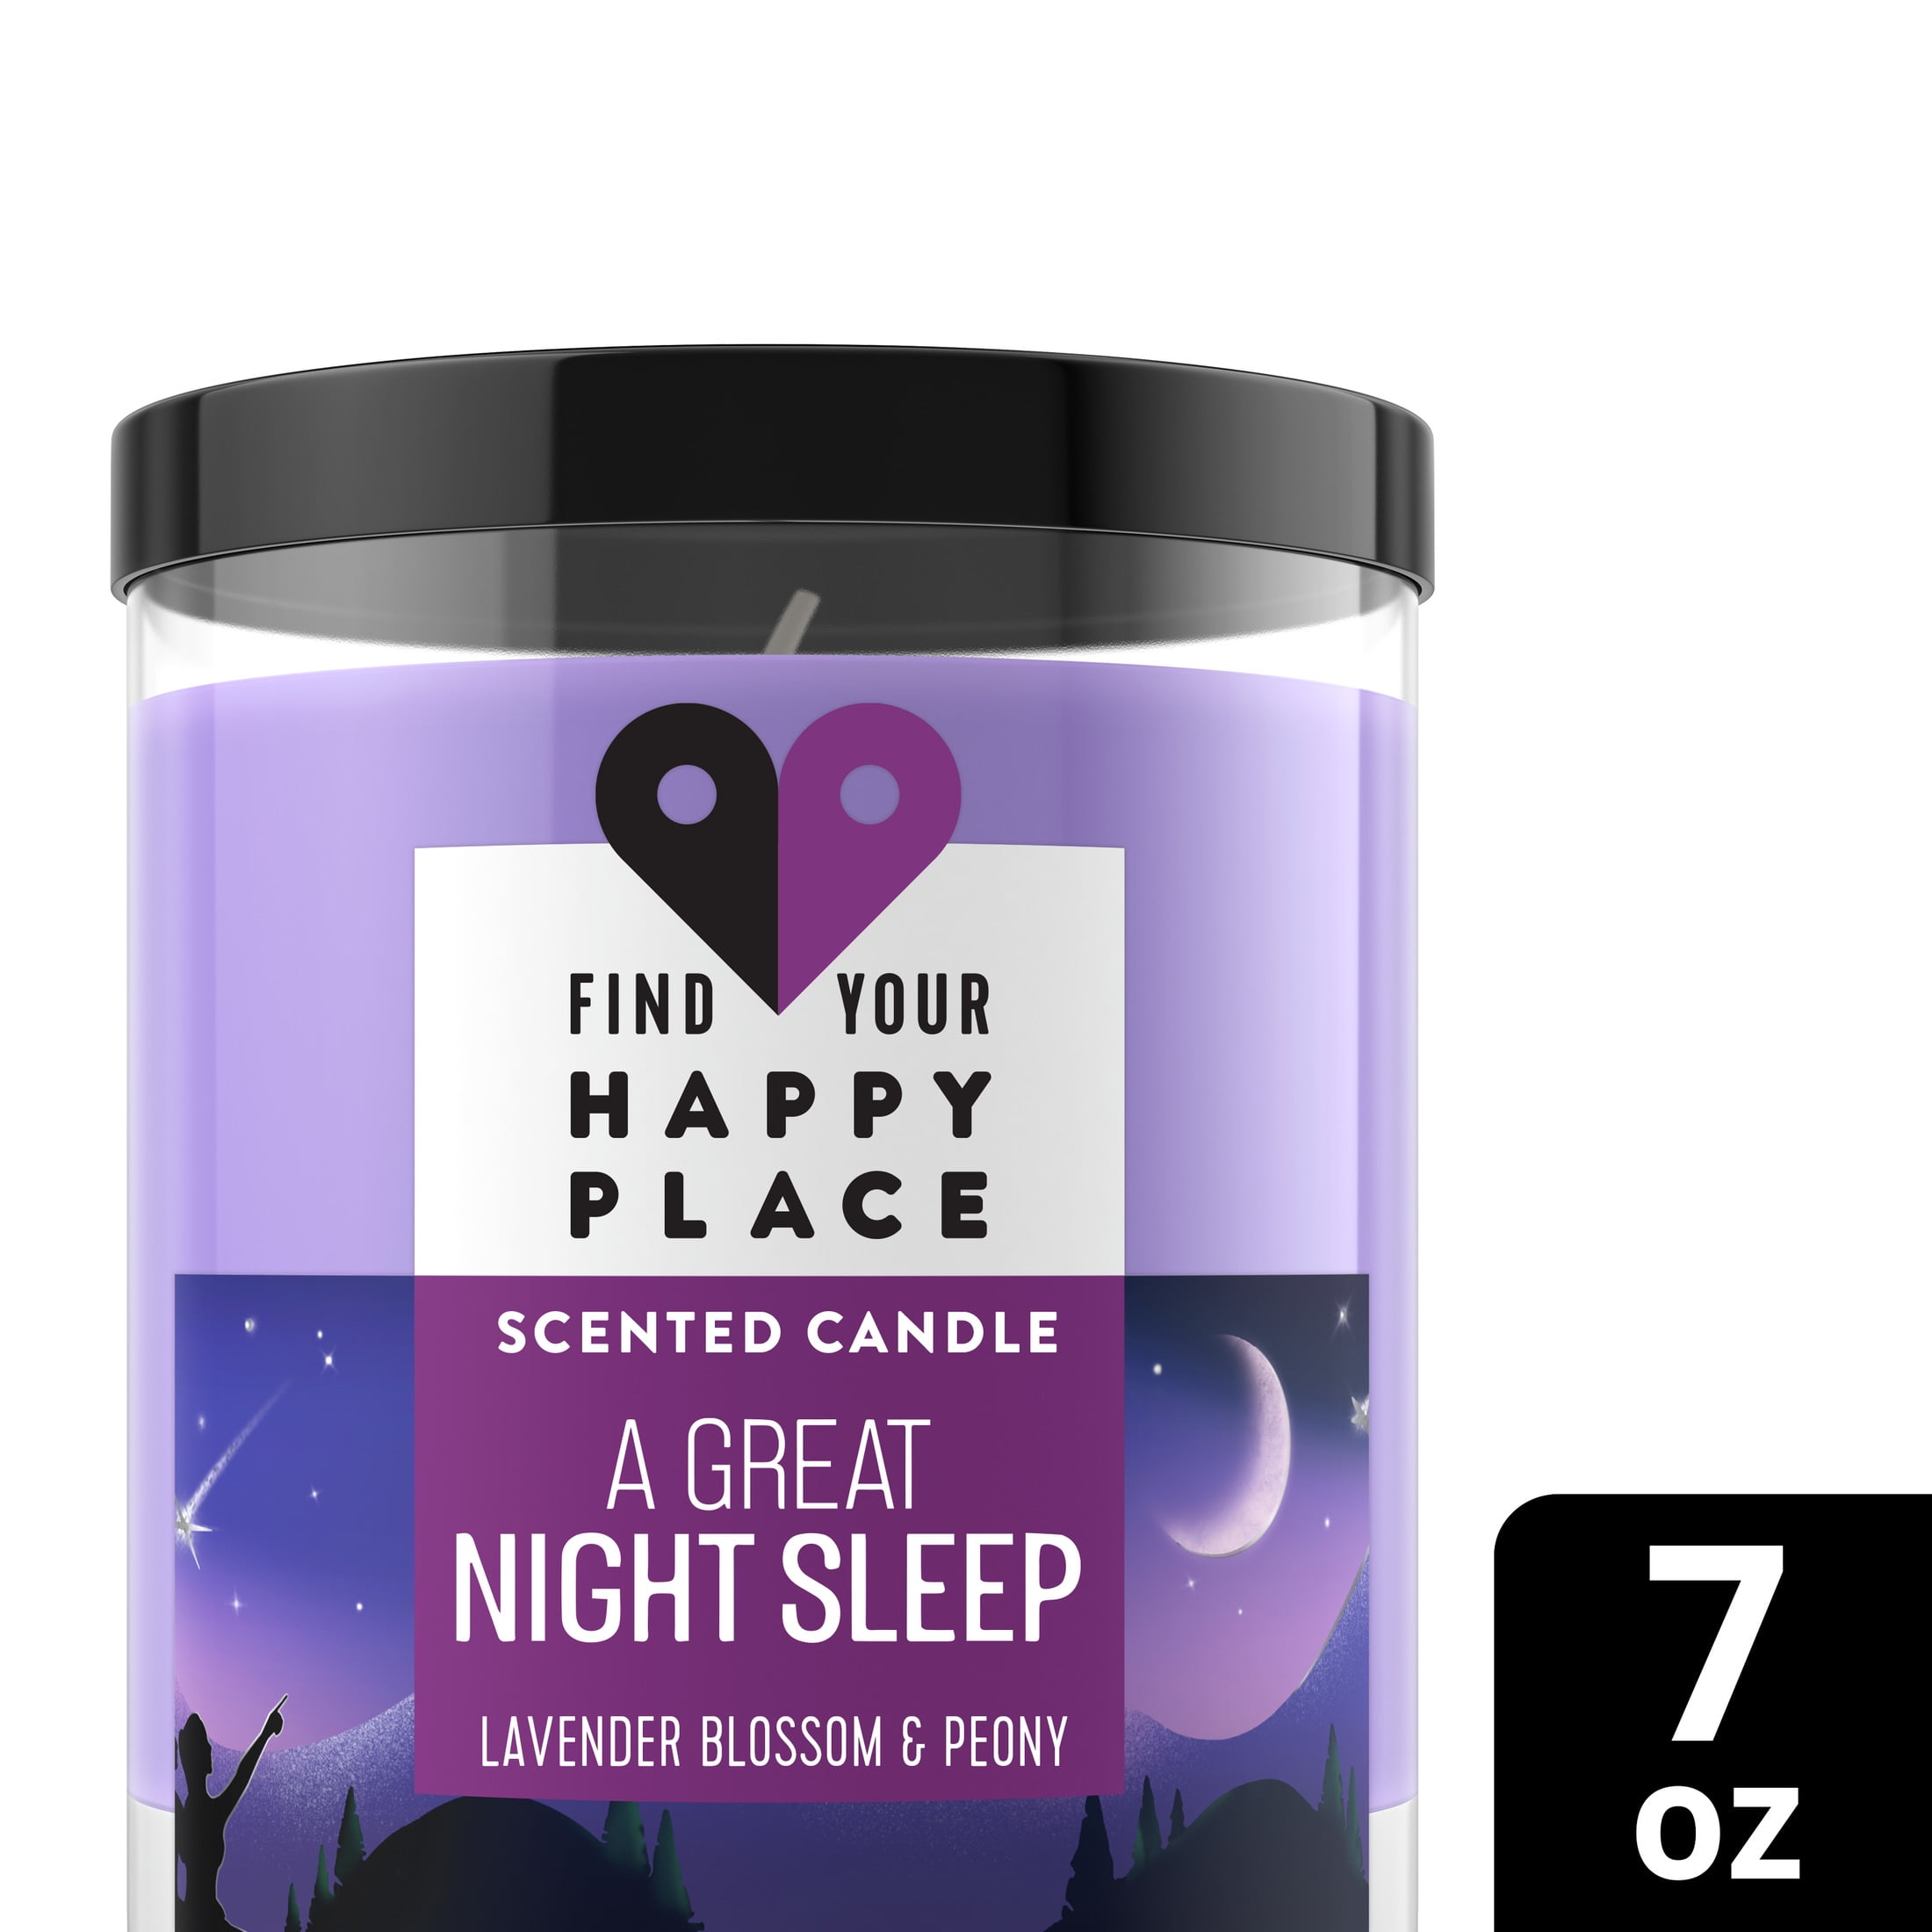 Find Your Happy Place Scented Jar Candle A Great Night Sleep, 7 oz